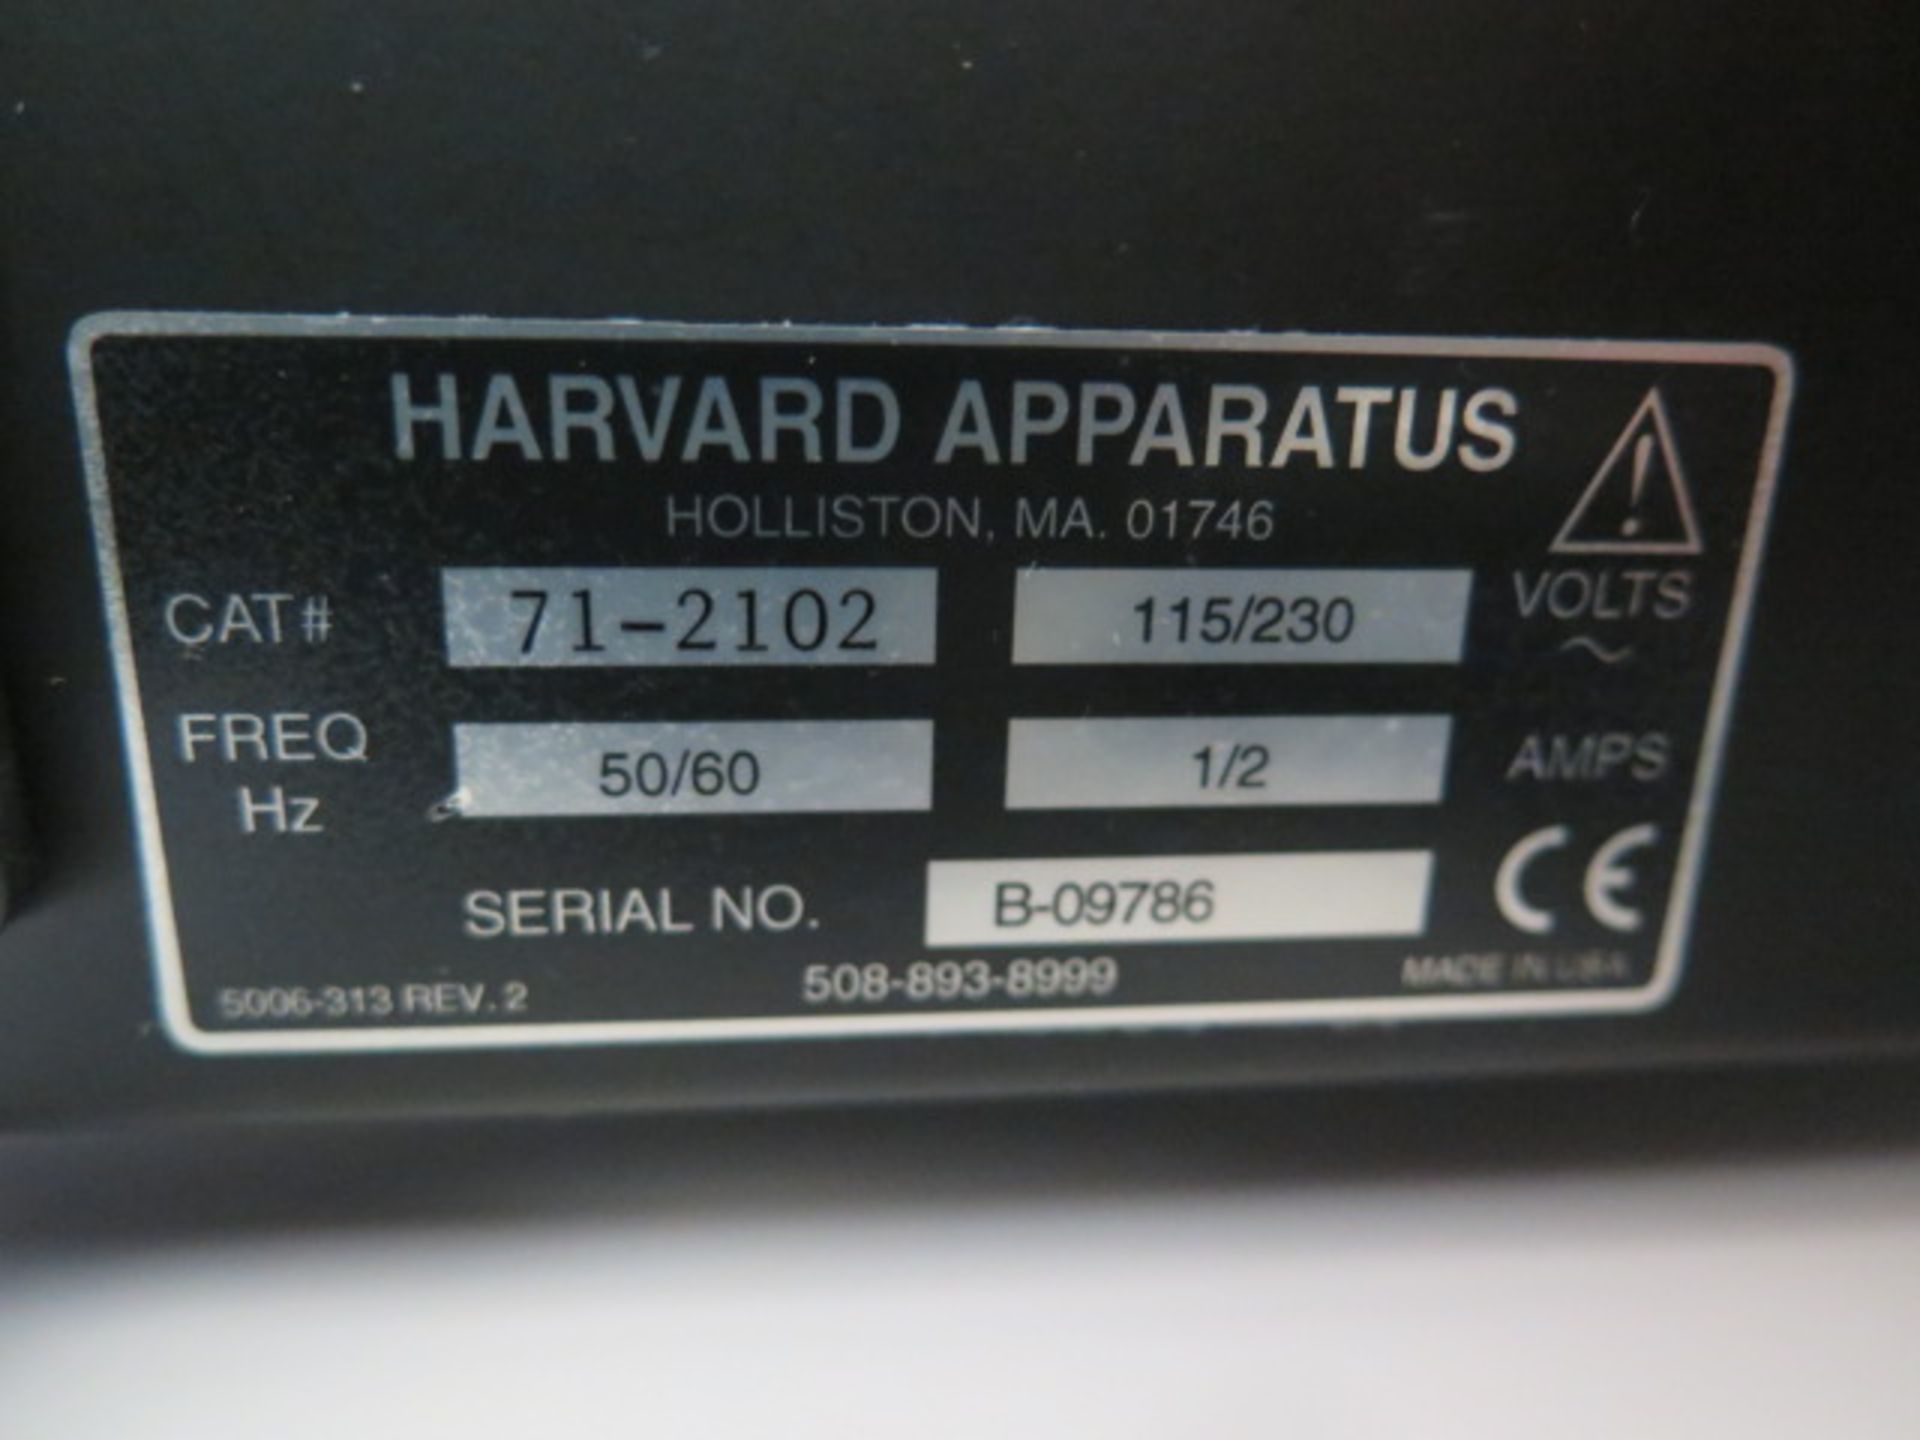 Harvard mdl. PHD2000 Programmable Syringe Pump w/ Pump Station (SOLD AS-IS - NO WARRANTY) - Image 7 of 7